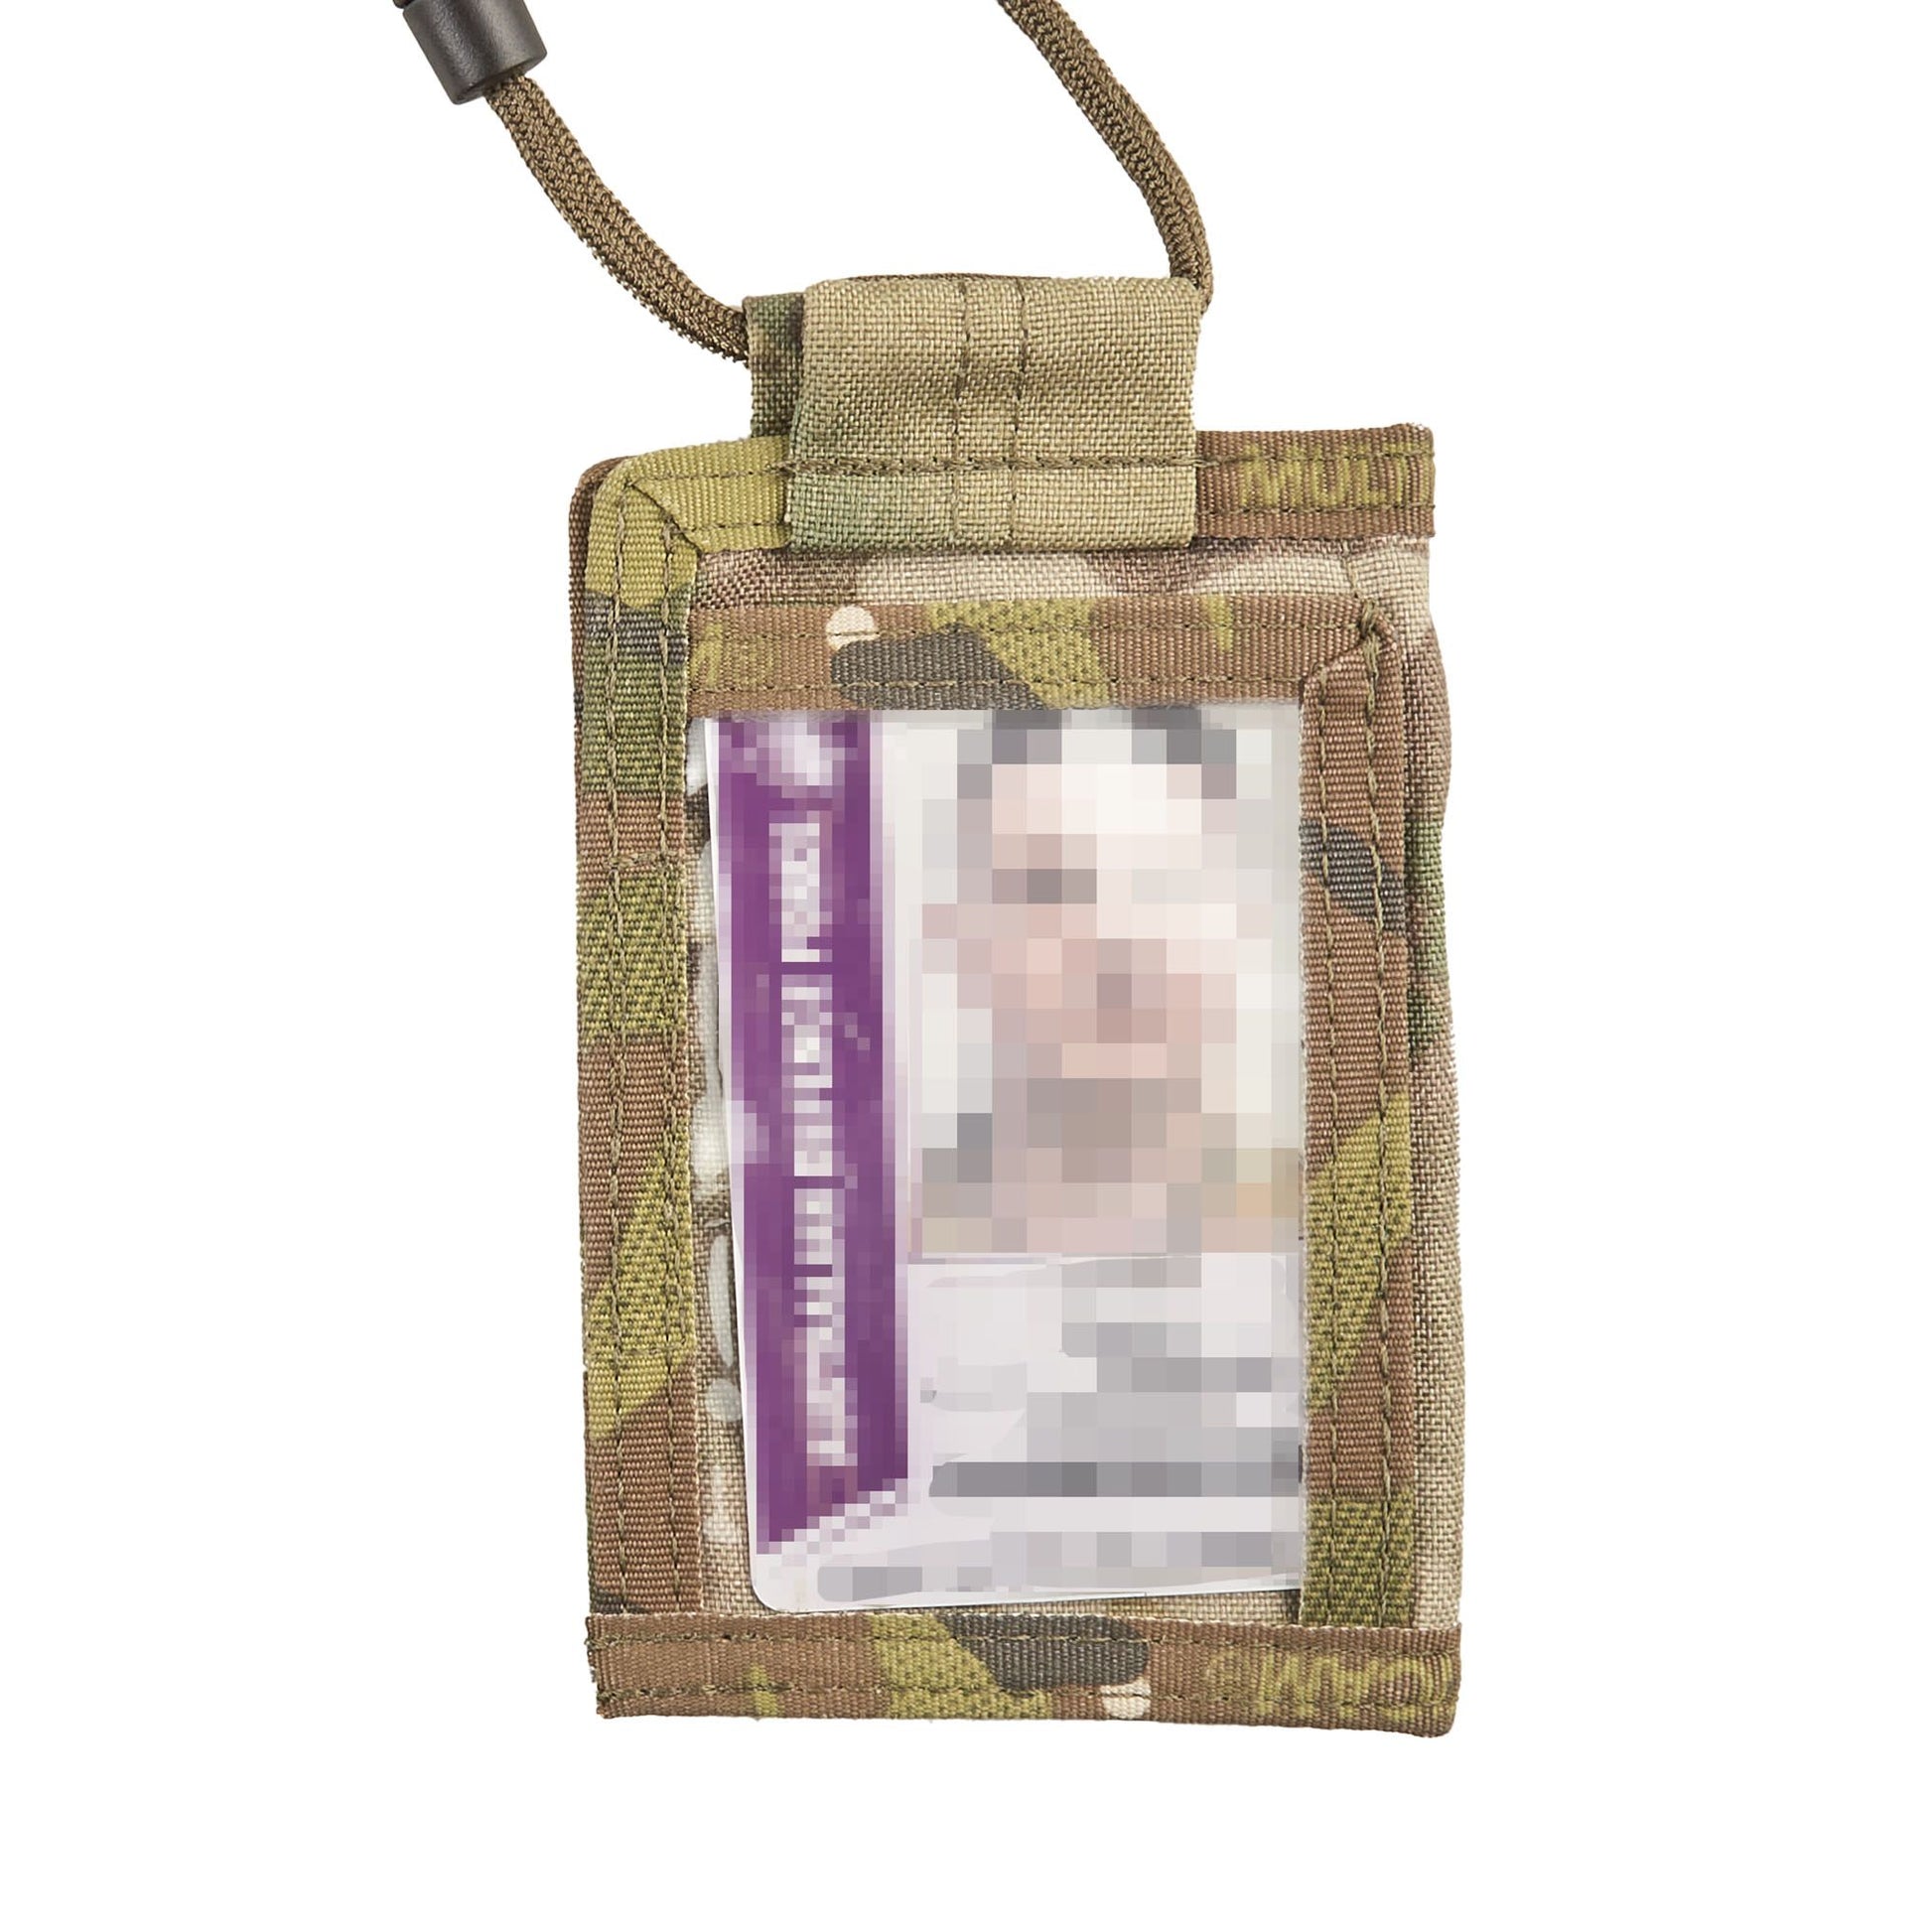 The Base ID holder contains three PVC windows, quick release lanyard and with small internal pockets. It's secure and practical, featuring a simple yet effective design that's perfect for storing and accessing your important items quickly and easily. www.defenceqstore.com.au